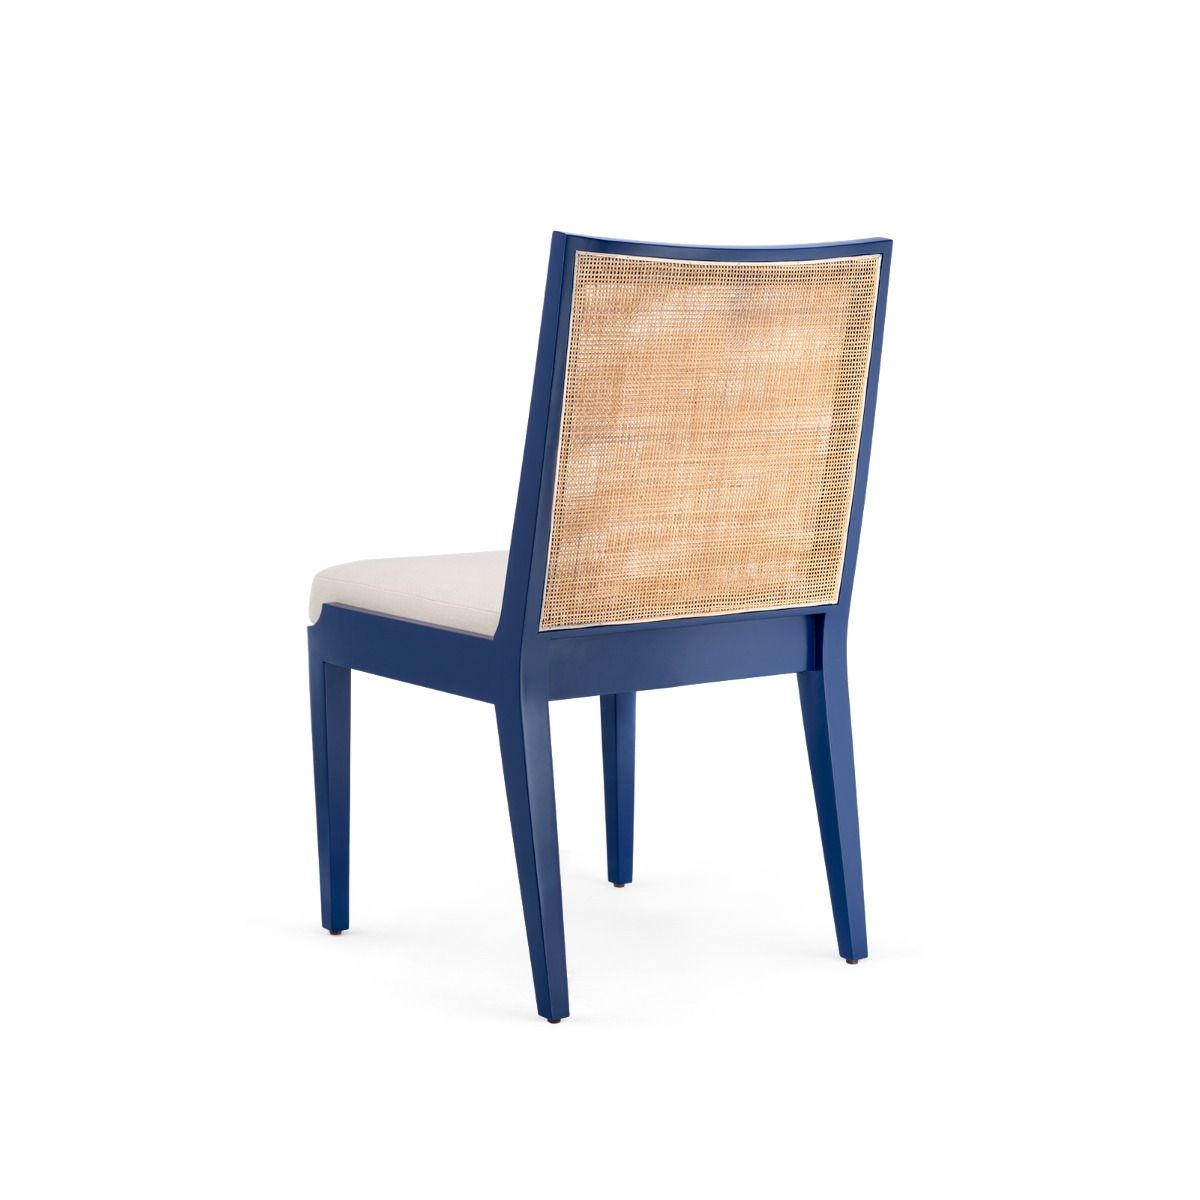 Load image into Gallery viewer, Ernest Side Chair Dining Chair Bungalow 5     Four Hands, Burke Decor, Mid Century Modern Furniture, Old Bones Furniture Company, Old Bones Co, Modern Mid Century, Designer Furniture, https://www.oldbonesco.com/
